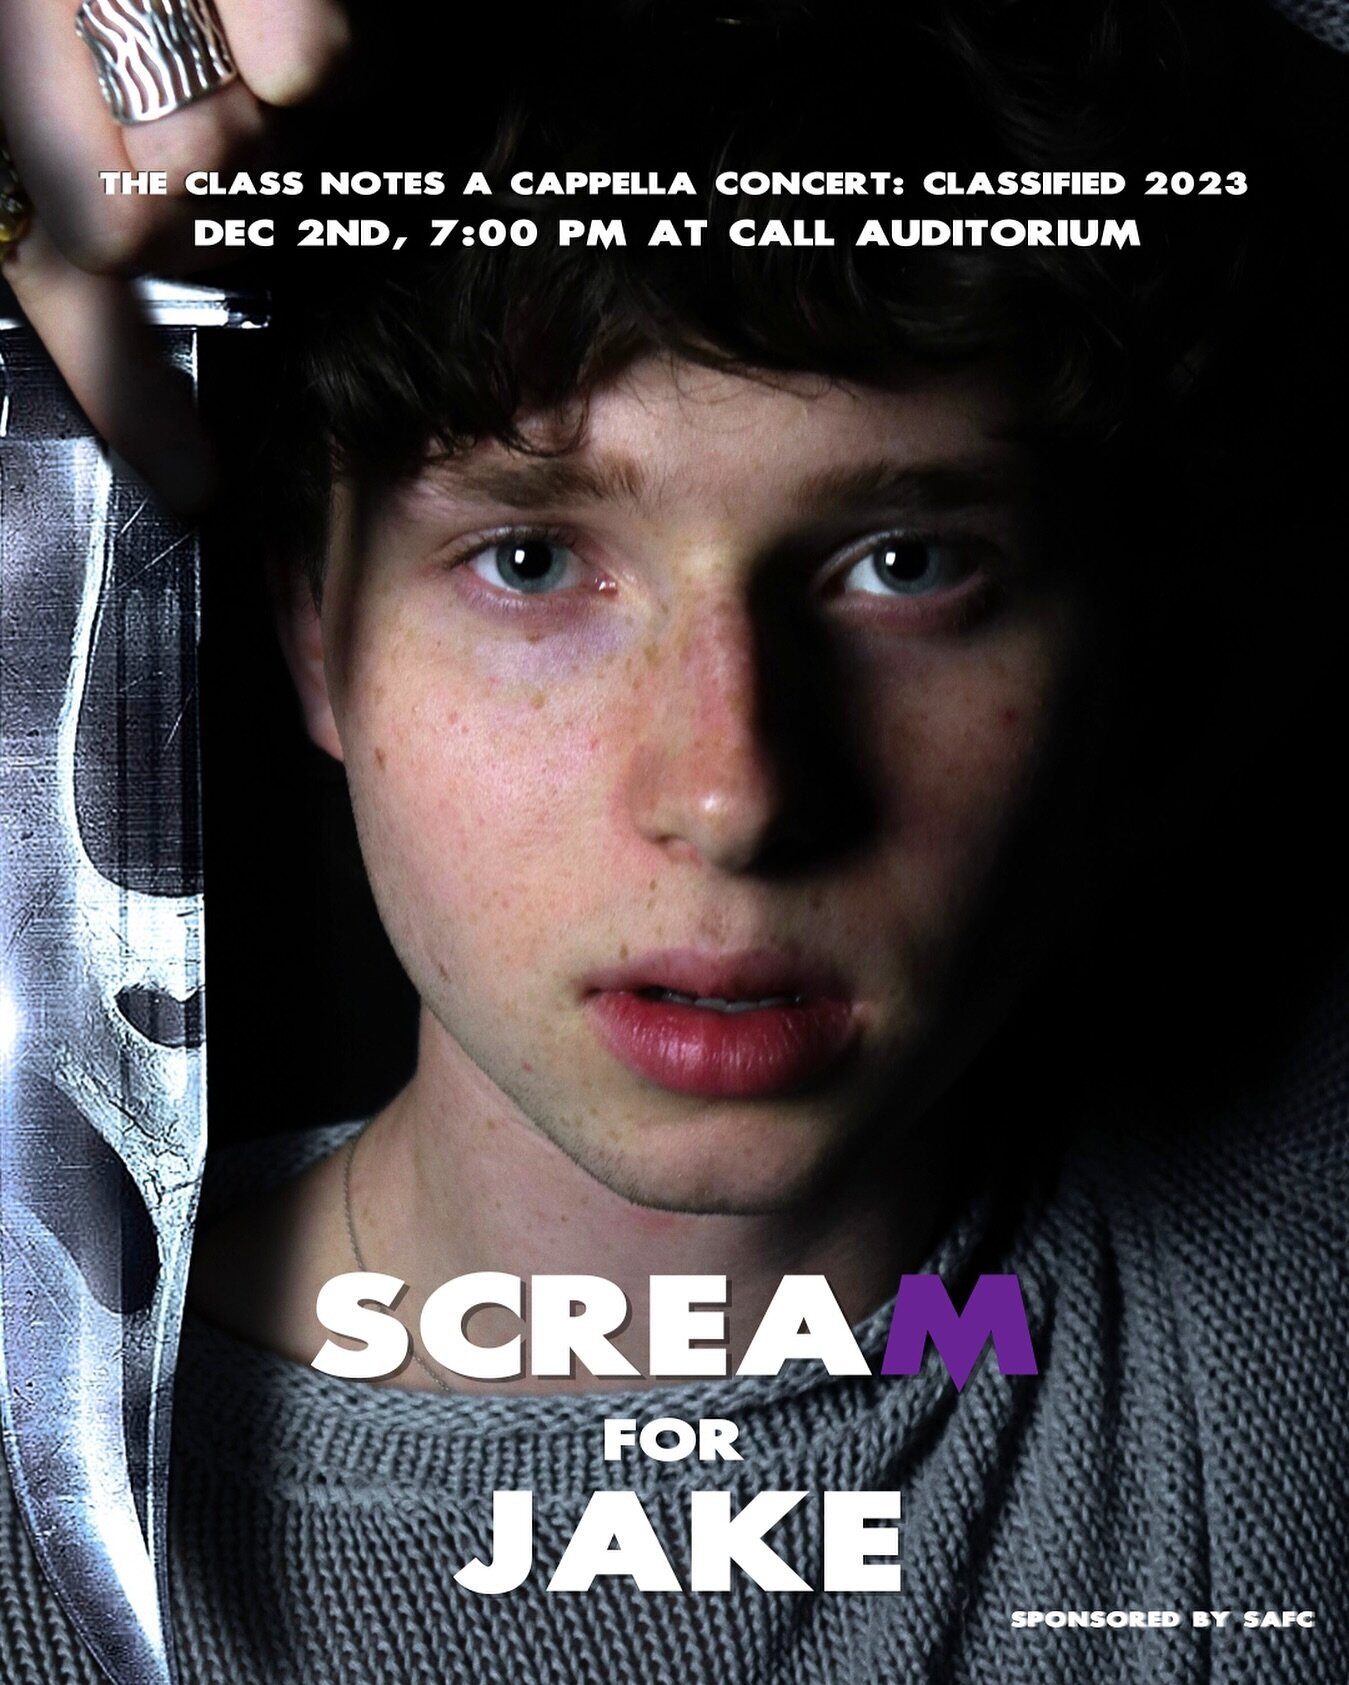 SCREAM for Jake and the Class Notes at our fall concert on December 2nd, at 7PM at Call Auditorium. Get your ticket through the link in our bio or DM us.